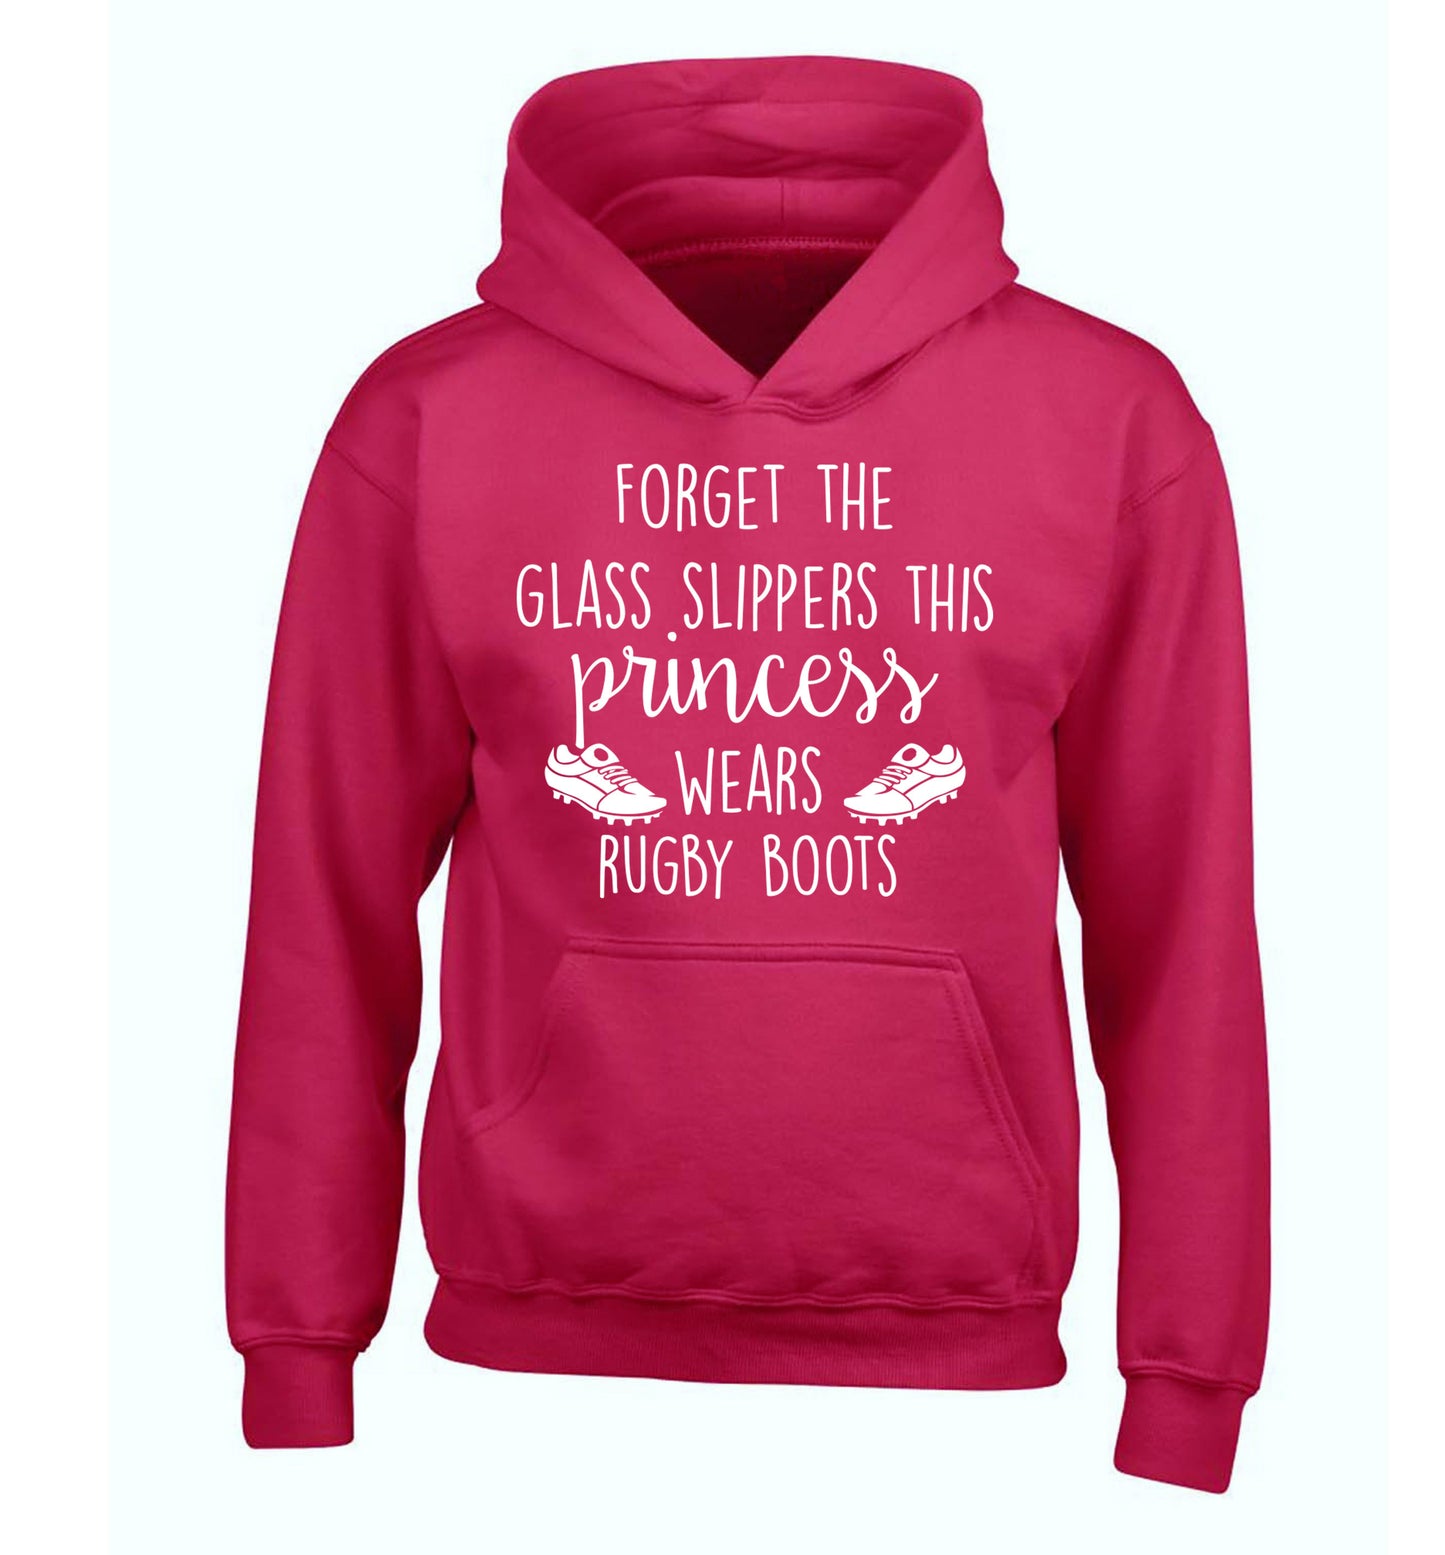 Forget the glass slippers this princess wears rugby boots children's pink hoodie 12-14 Years